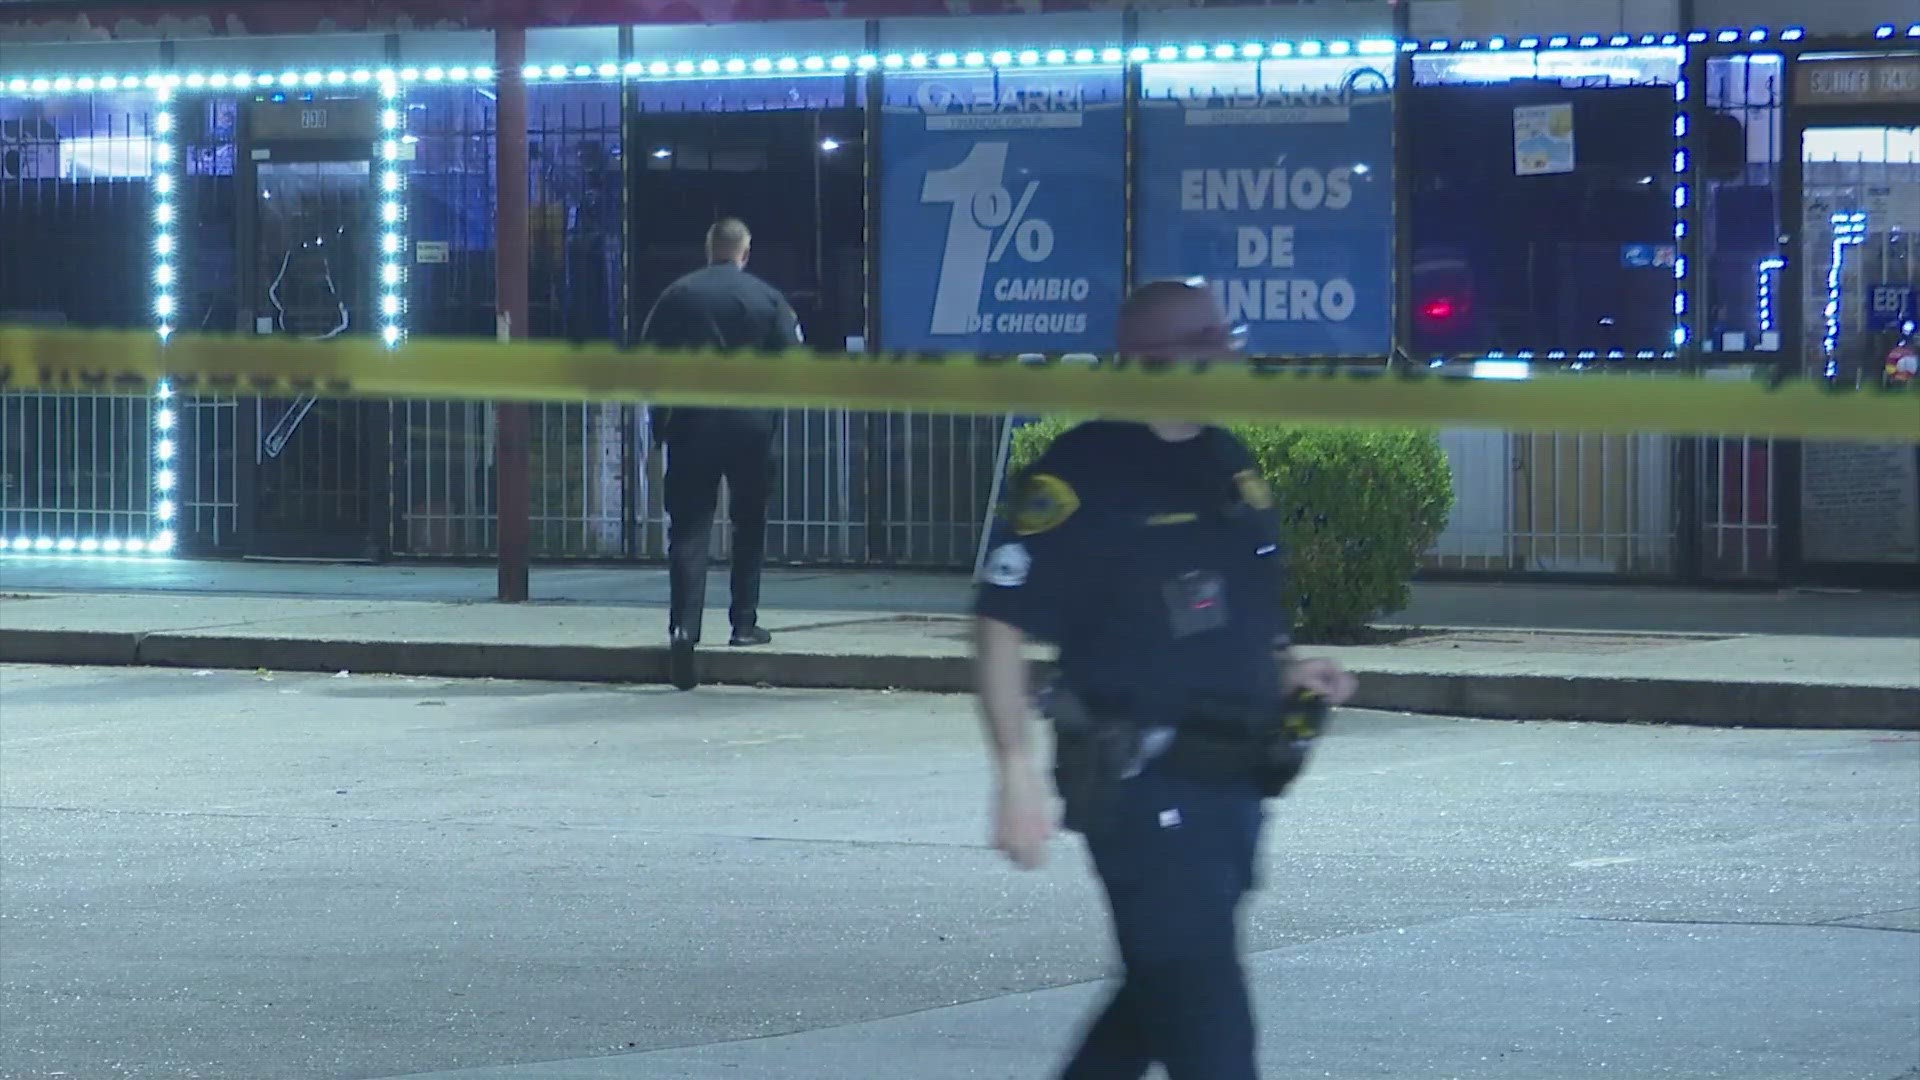 Police said after the victims were denied entry to the club, they were robbed and shot by two men as they walked back to their car.